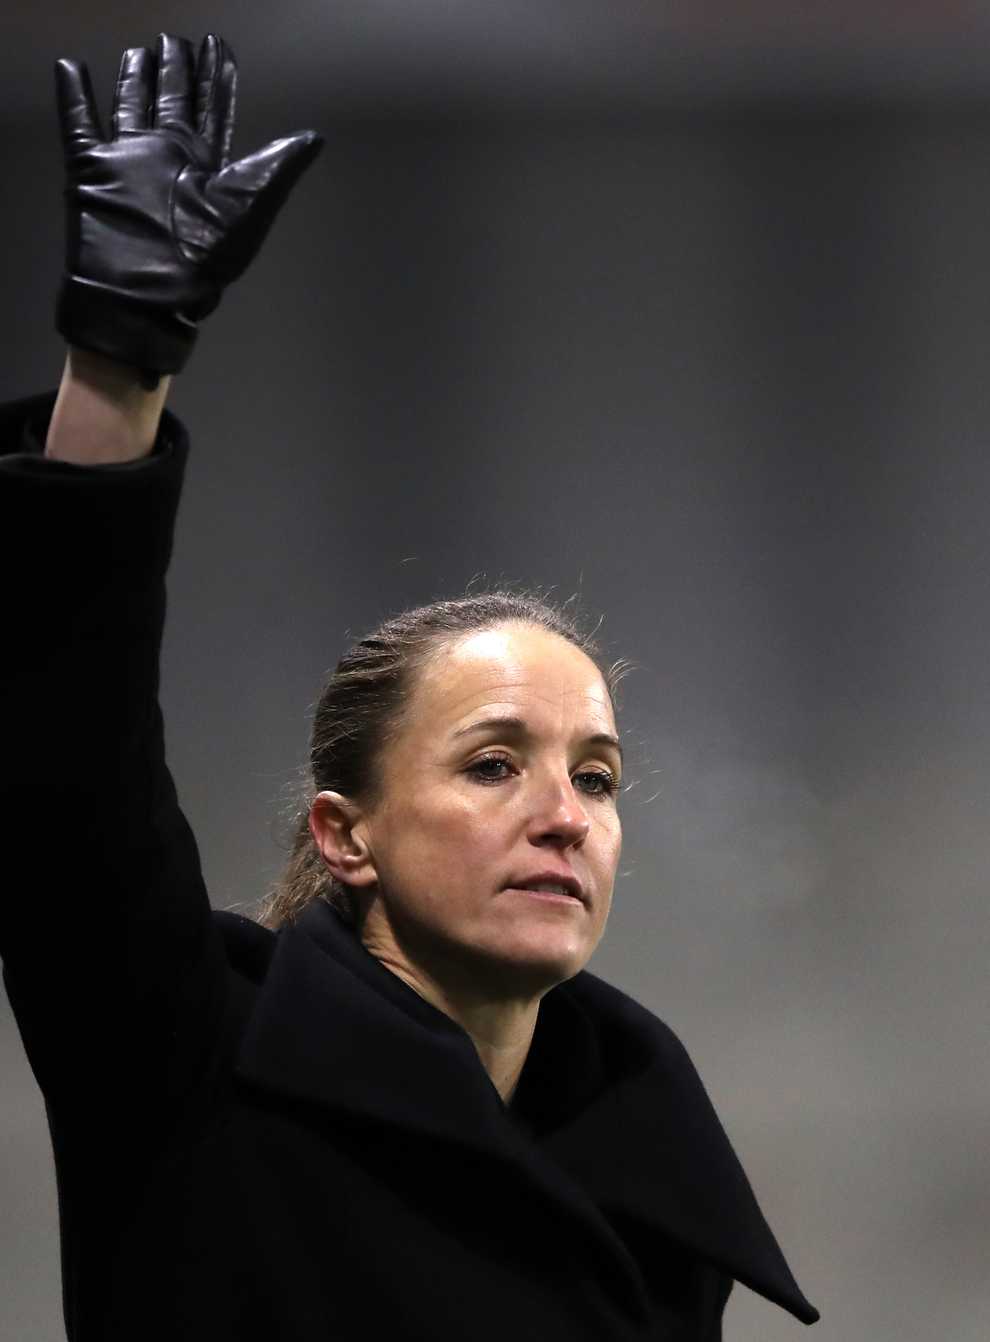 Manchester United announced on Wednesday that boss Casey Stoney is stepping down at the end of the season (Nick Potts/PA).